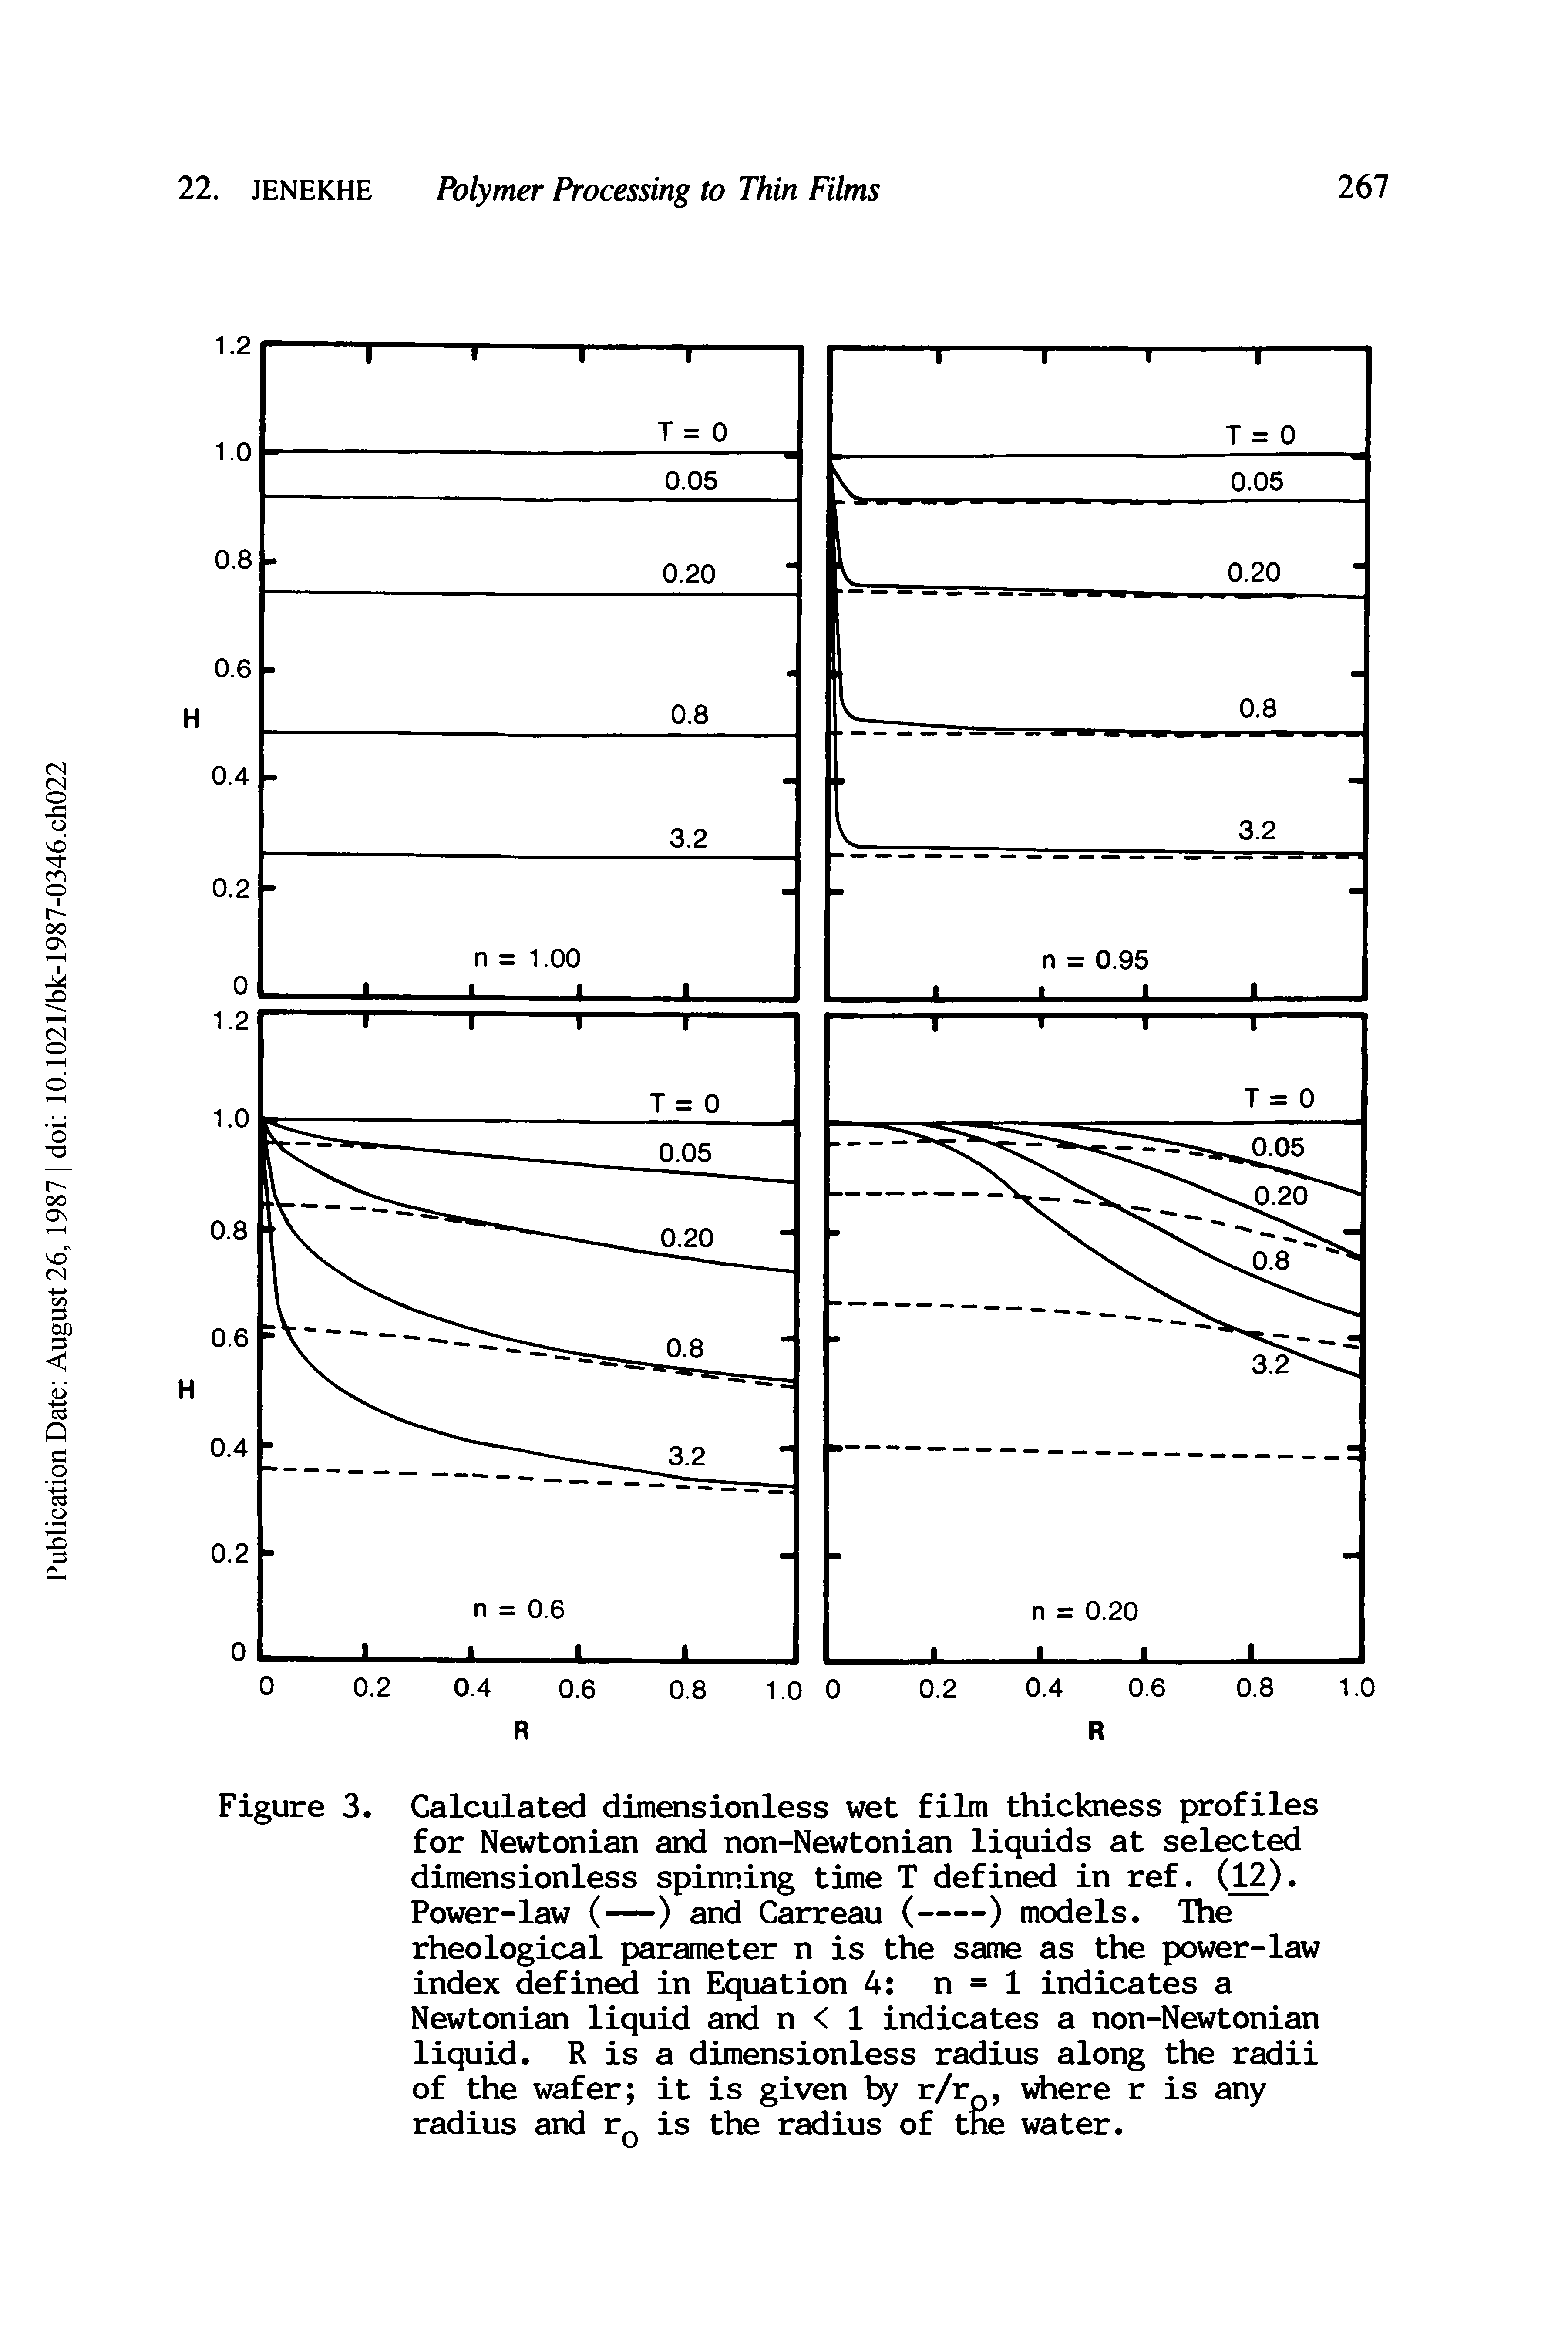 Figure 3. Calculated dimensionless wet film thickness profiles for Newtonian and non-Newtonian liquids at selected dimensionless spinning time T defined in ref. (12).